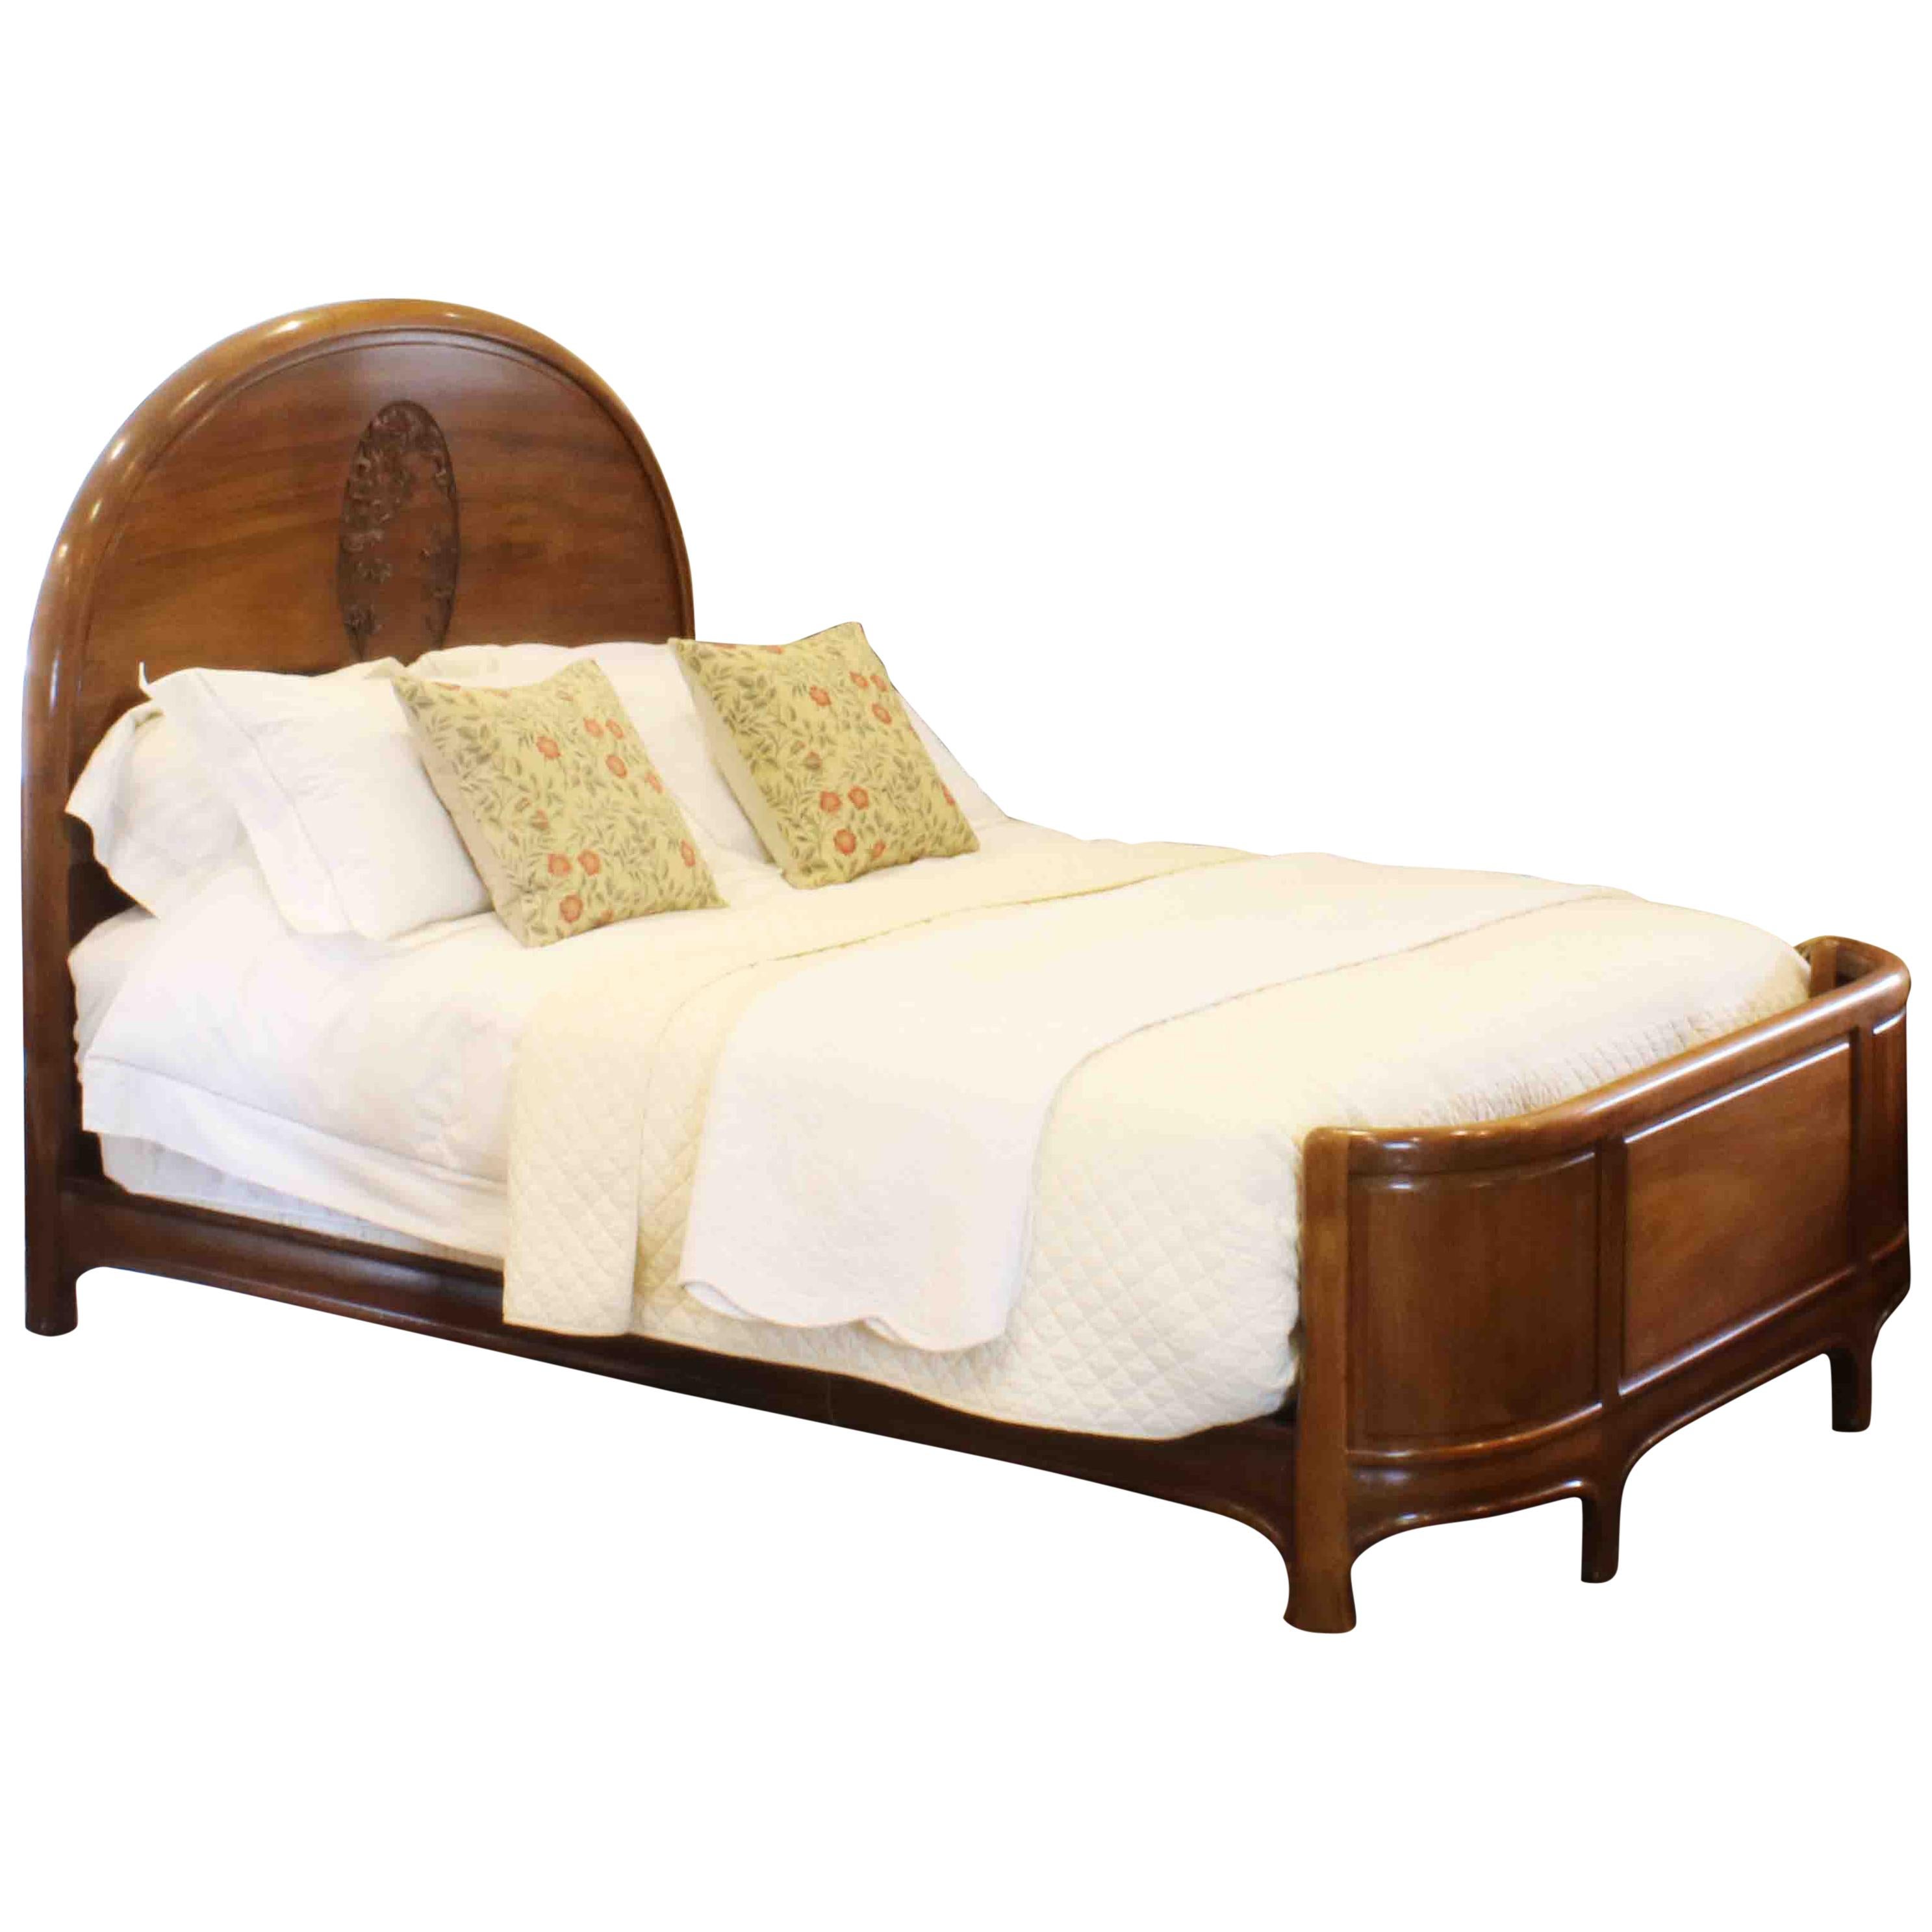 Wooden Bed with Oval Cameo, WK112